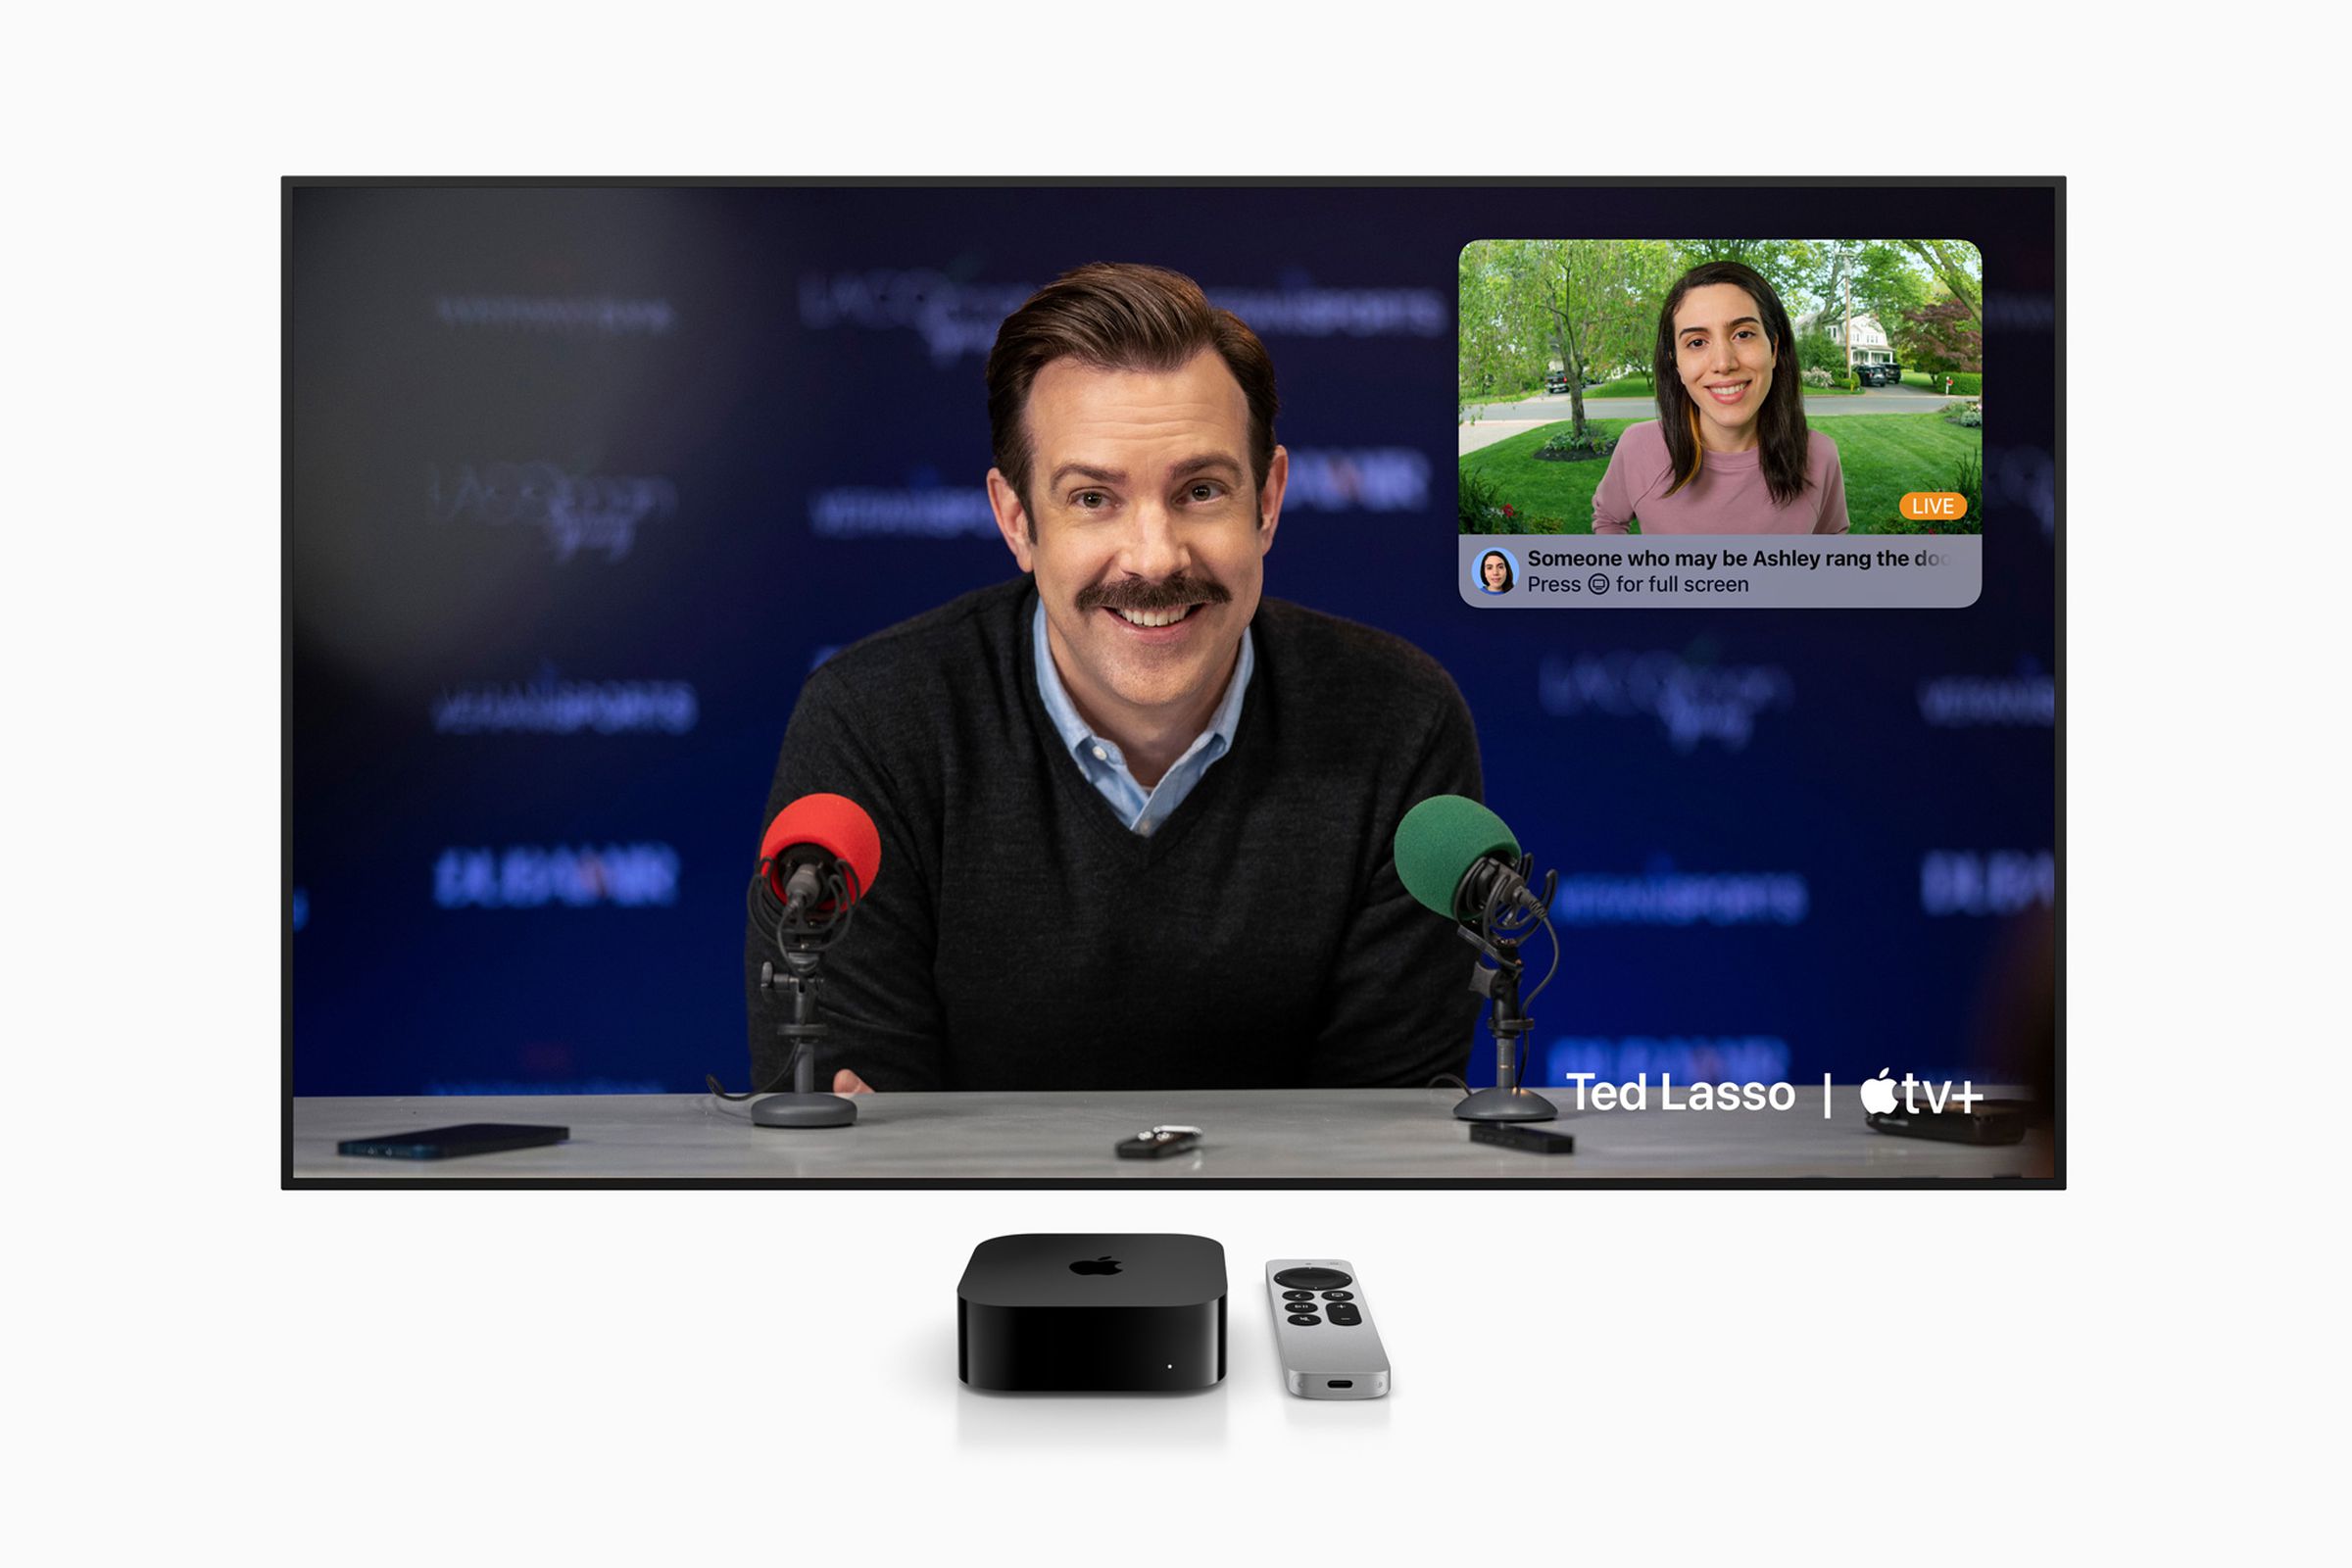 Photo of the new Apple TV sitting next to an Apple TV remote, both of which are under a TV screen displaying Ted Lasso.